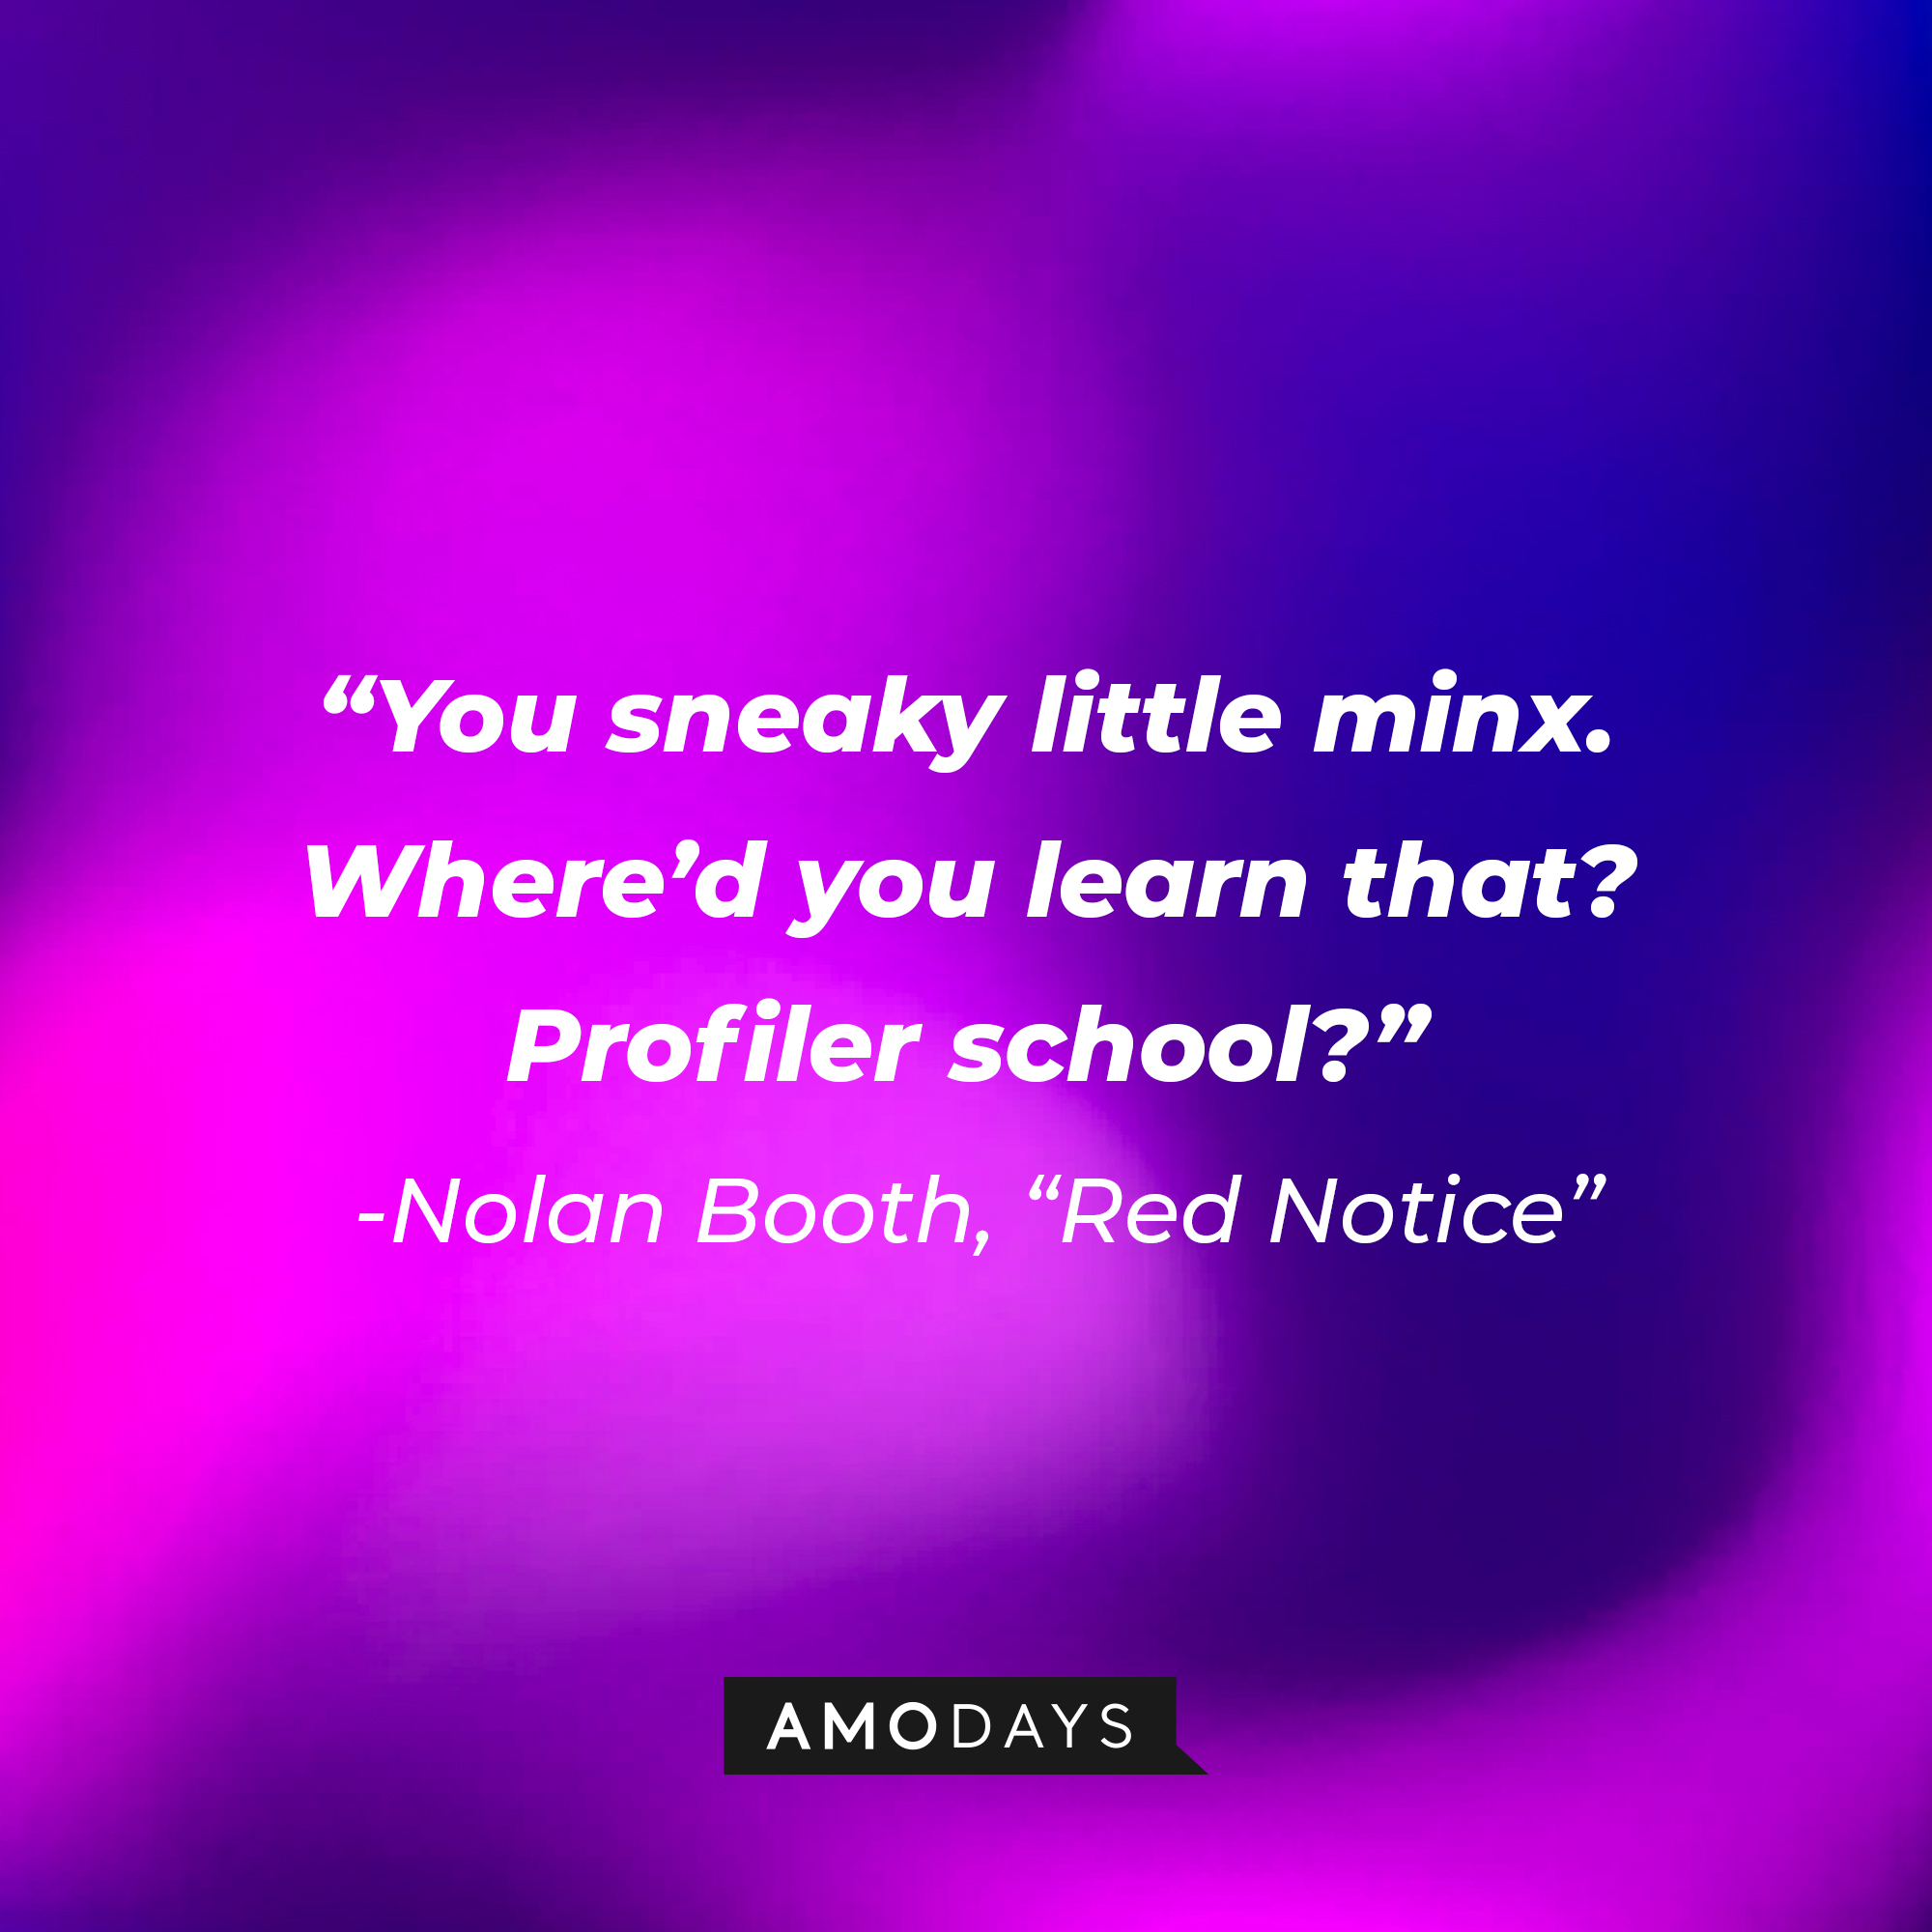 Nolan Booth's quote from "Red Notice:" “You sneaky little minx. Where’d you learn that? Profiler school?” | Source: AmoDays